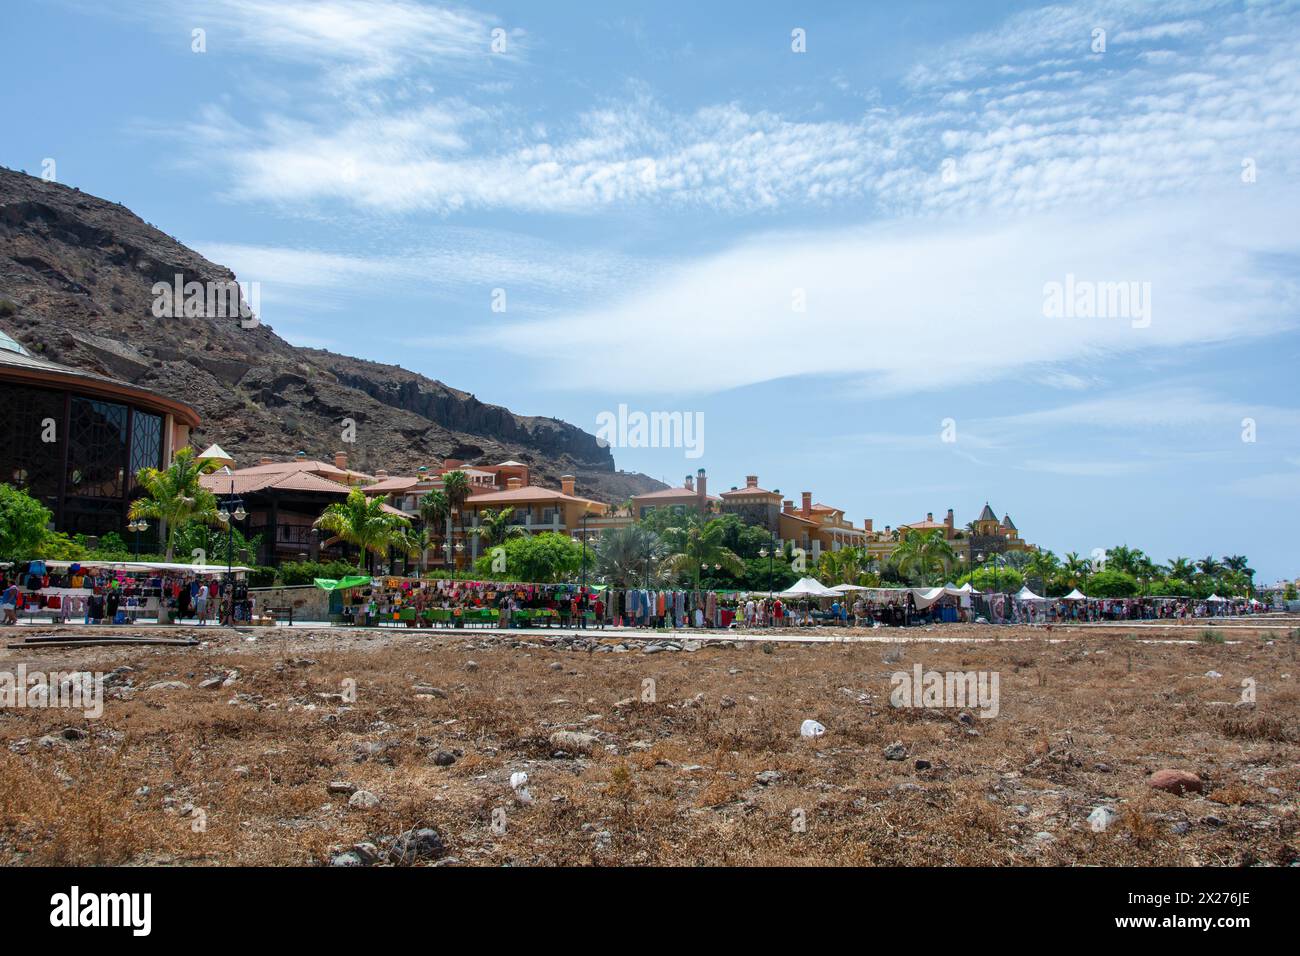 Large Friday market in the streets of the Spanish town of Puerto de Mogán, on the Canary Island of Gran Canaria in Spain Stock Photo